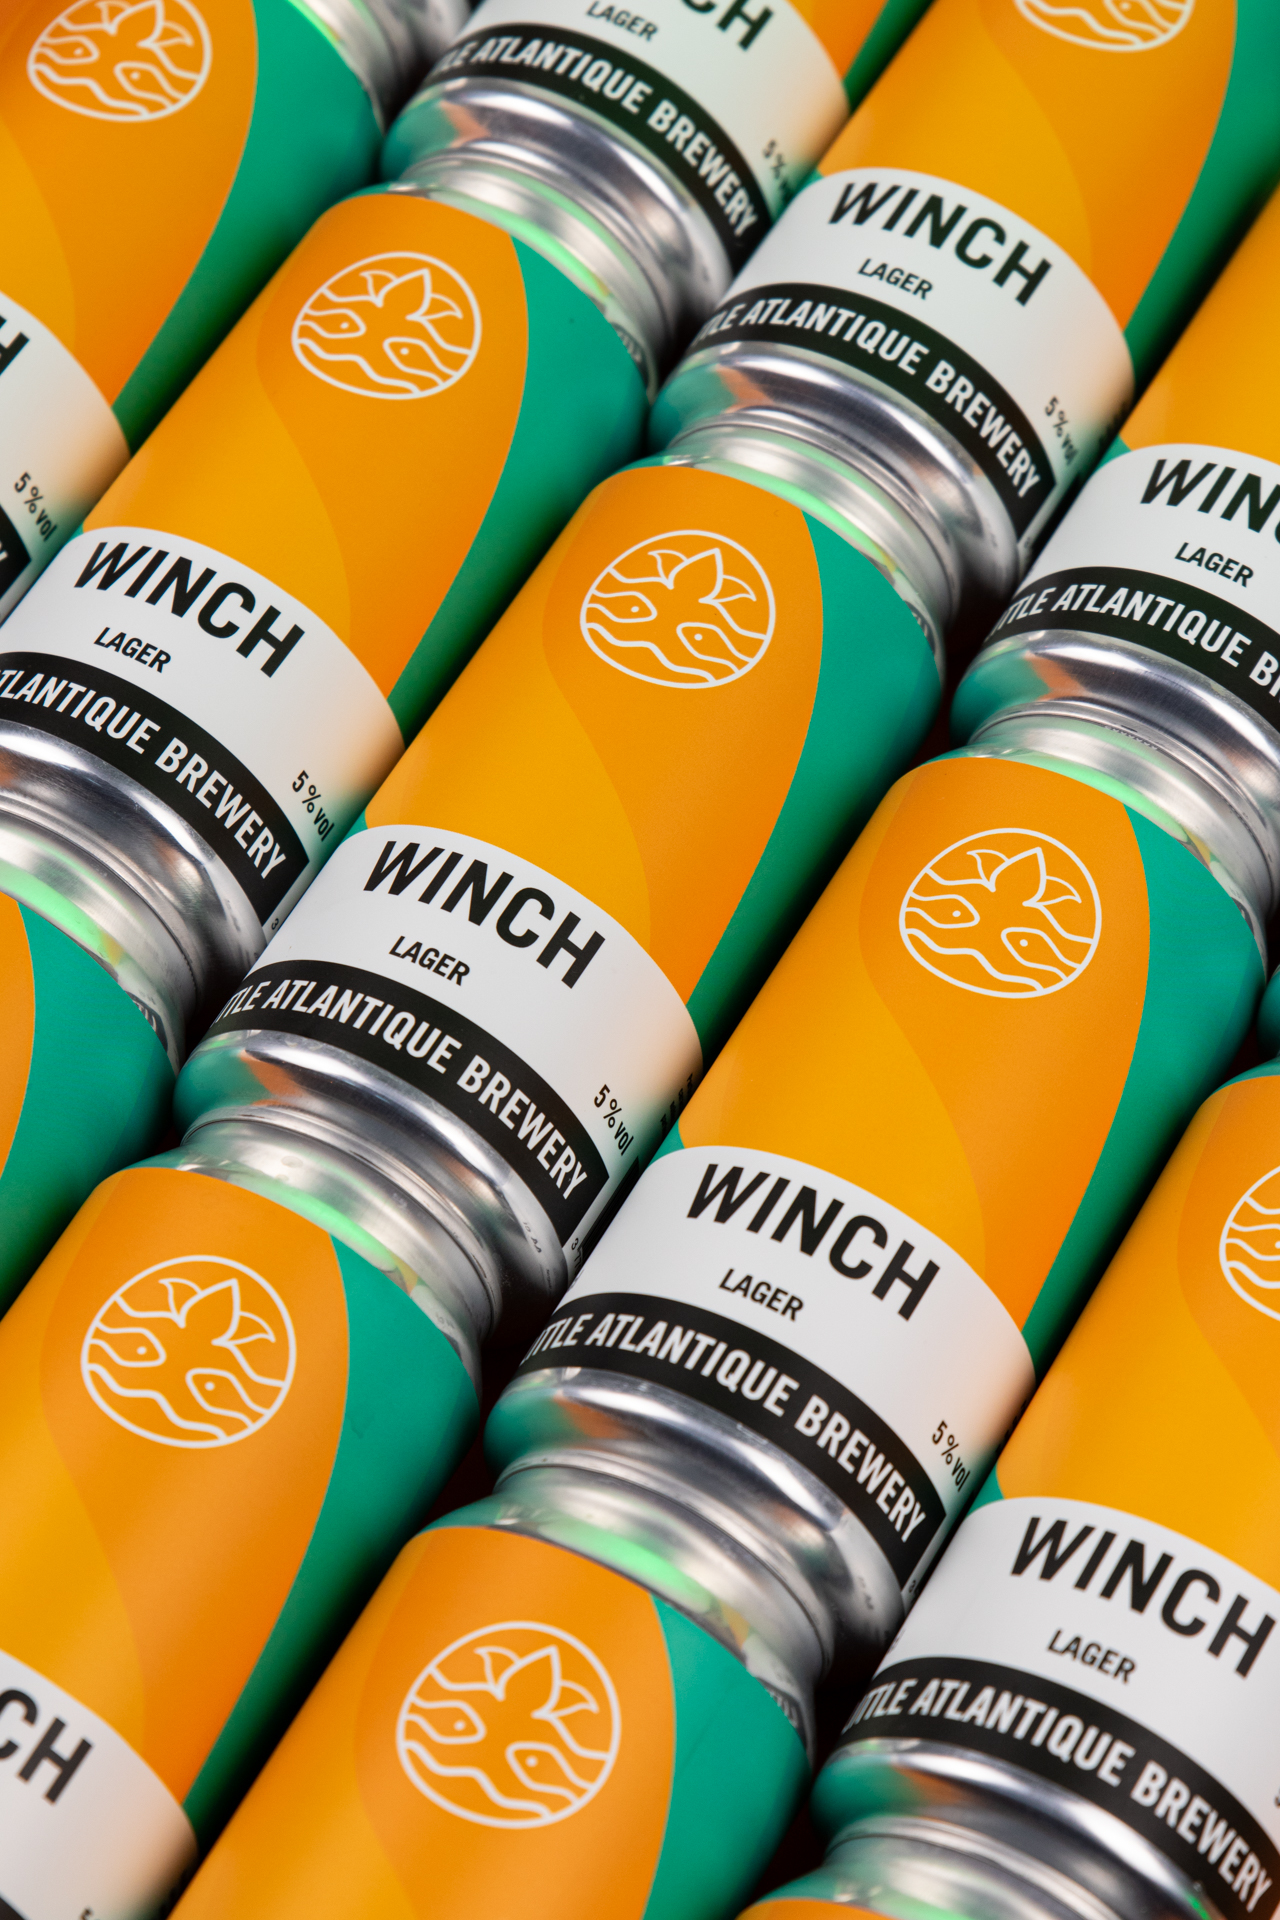 WINCH lager